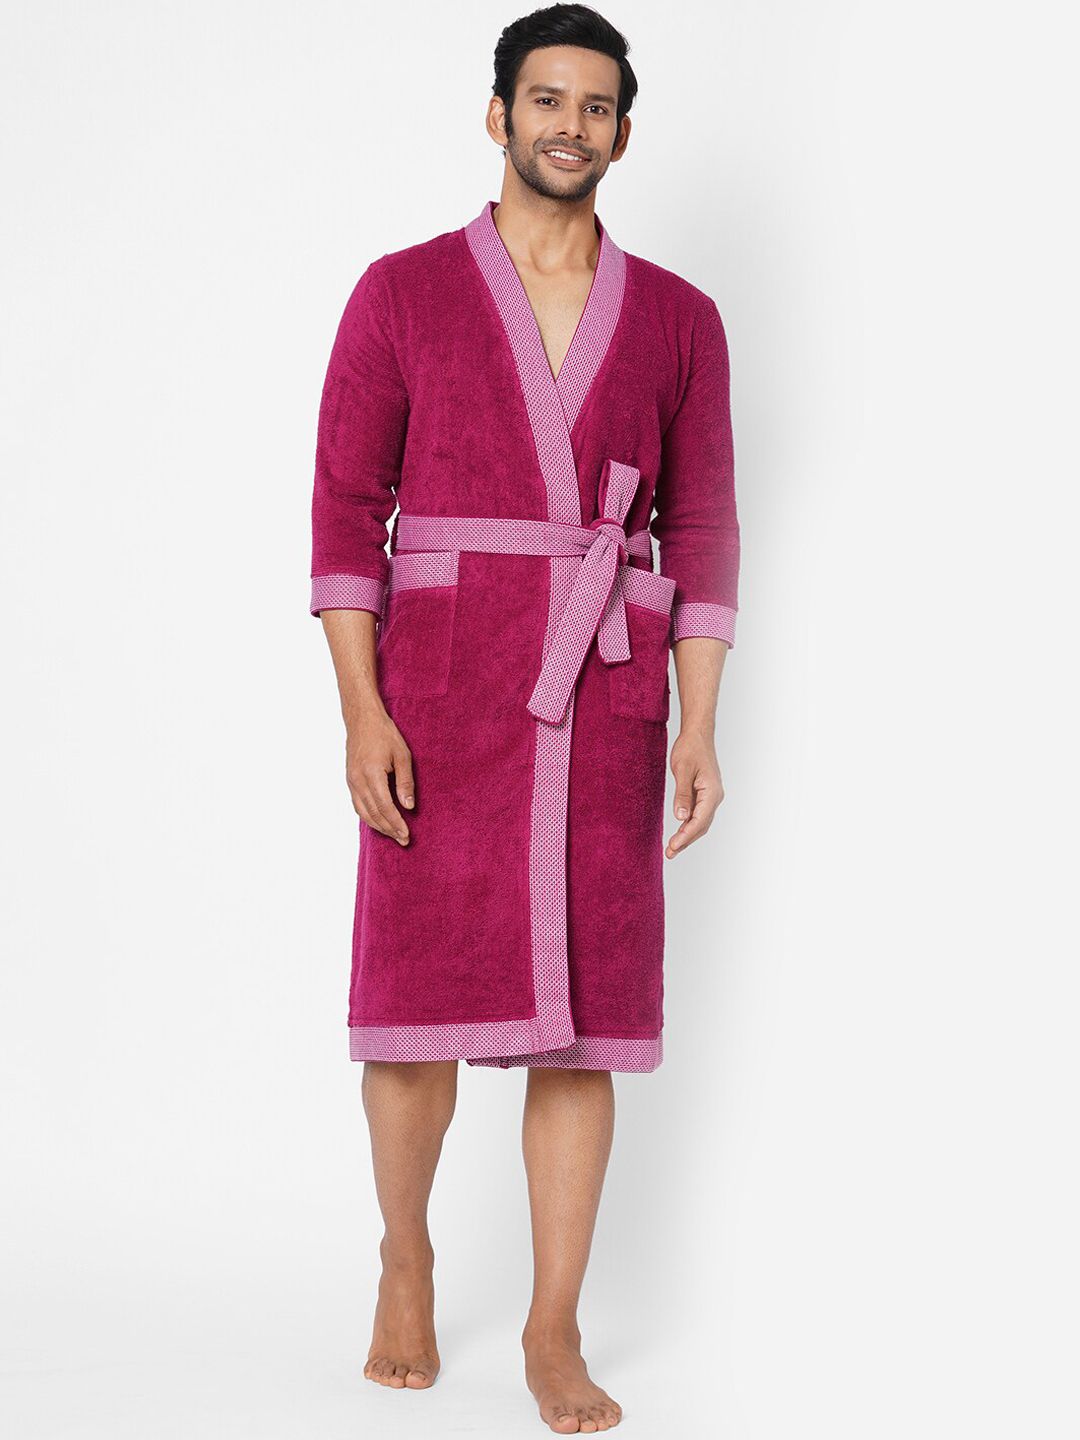 SPACES Unisex Violet & Burgundy Ultra Soft Quick Dry Pure Cotton Bath Robe Price in India